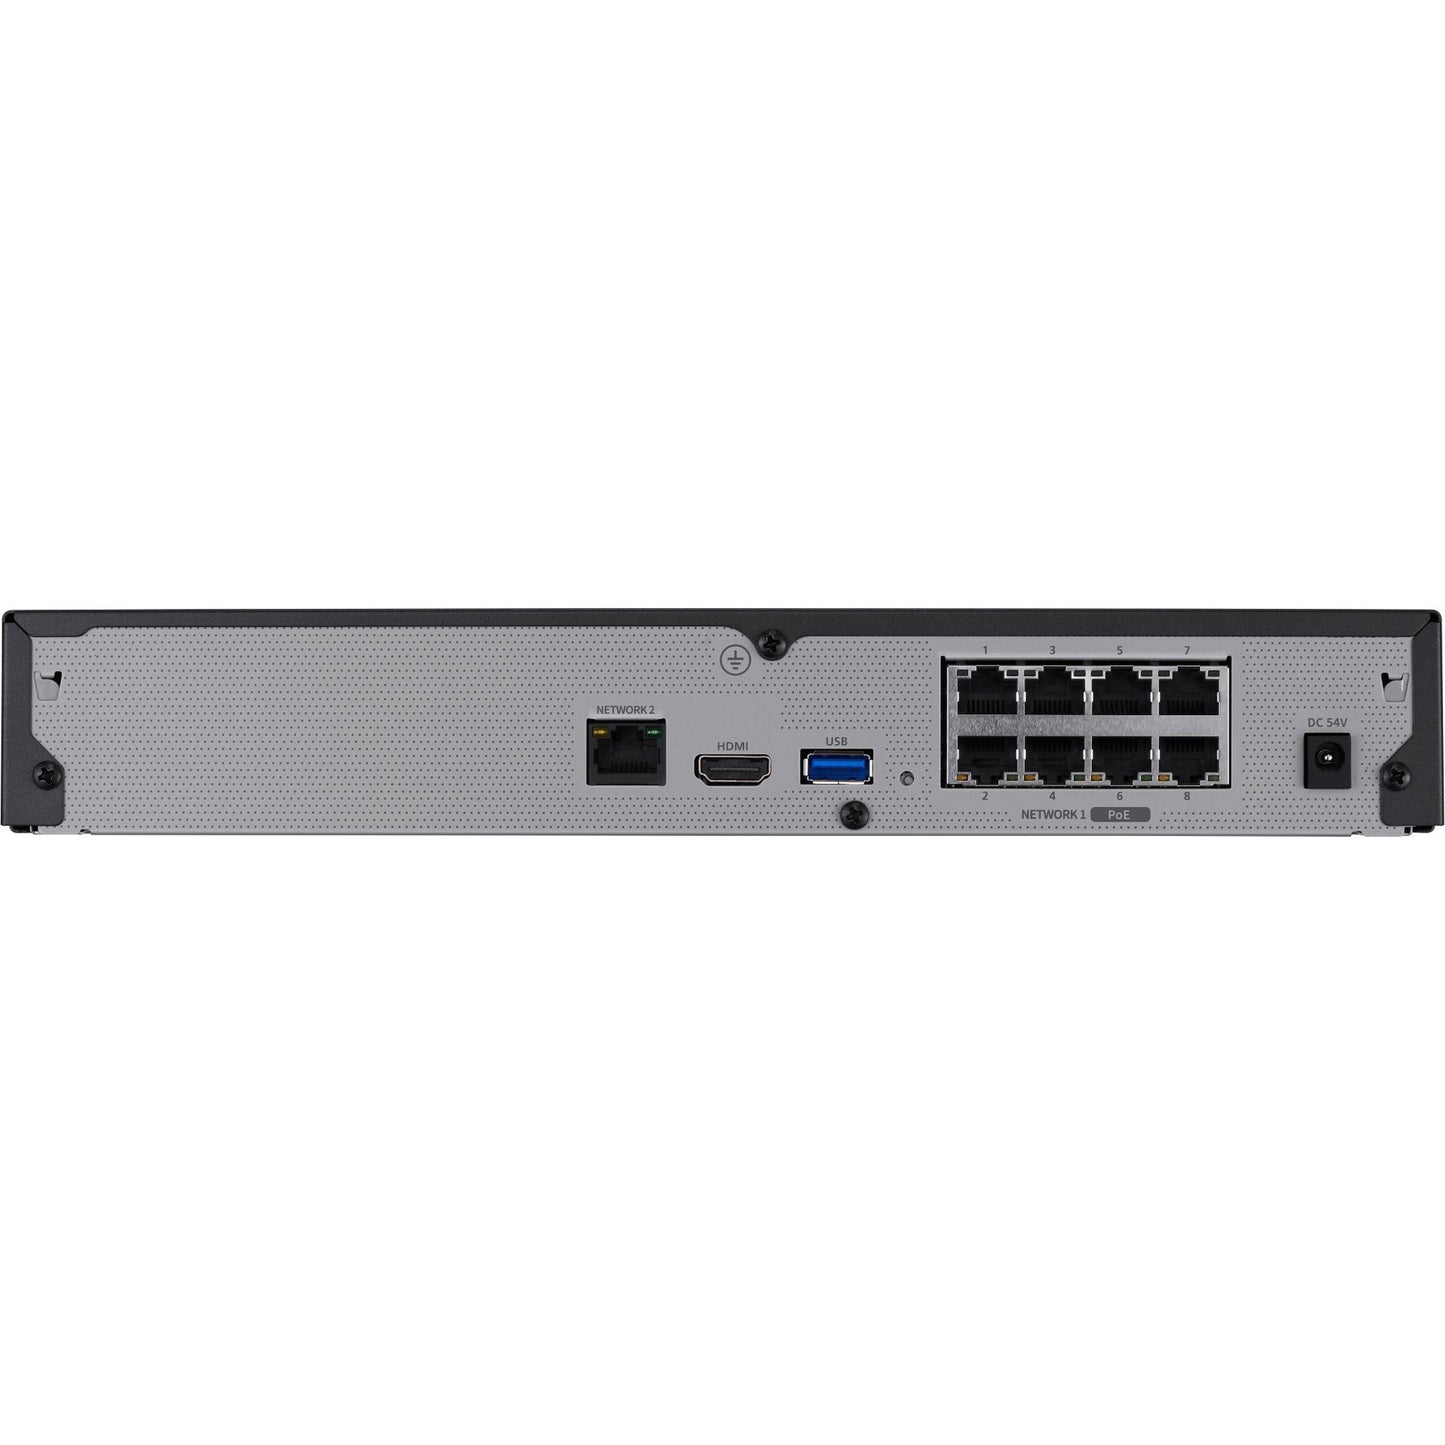 Wisenet 8Channel 8MP NVR with PoE switch - 6 TB HDD